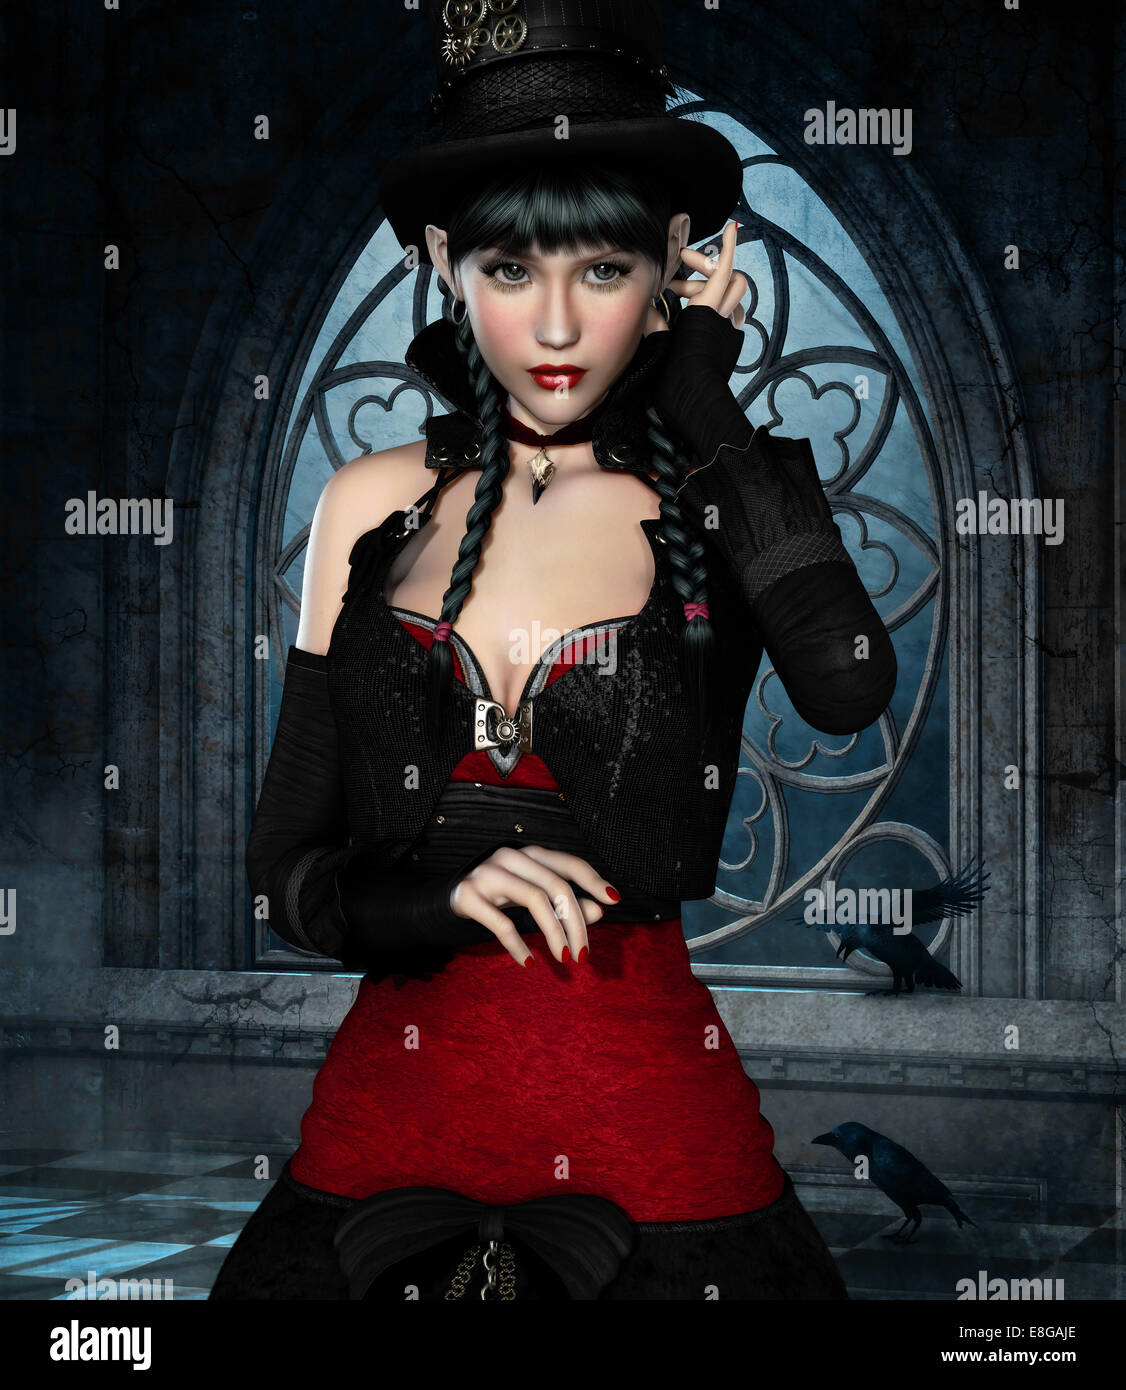 3d computer graphics of a girl with clothing in Steampunk-Gothic style Stock Photo